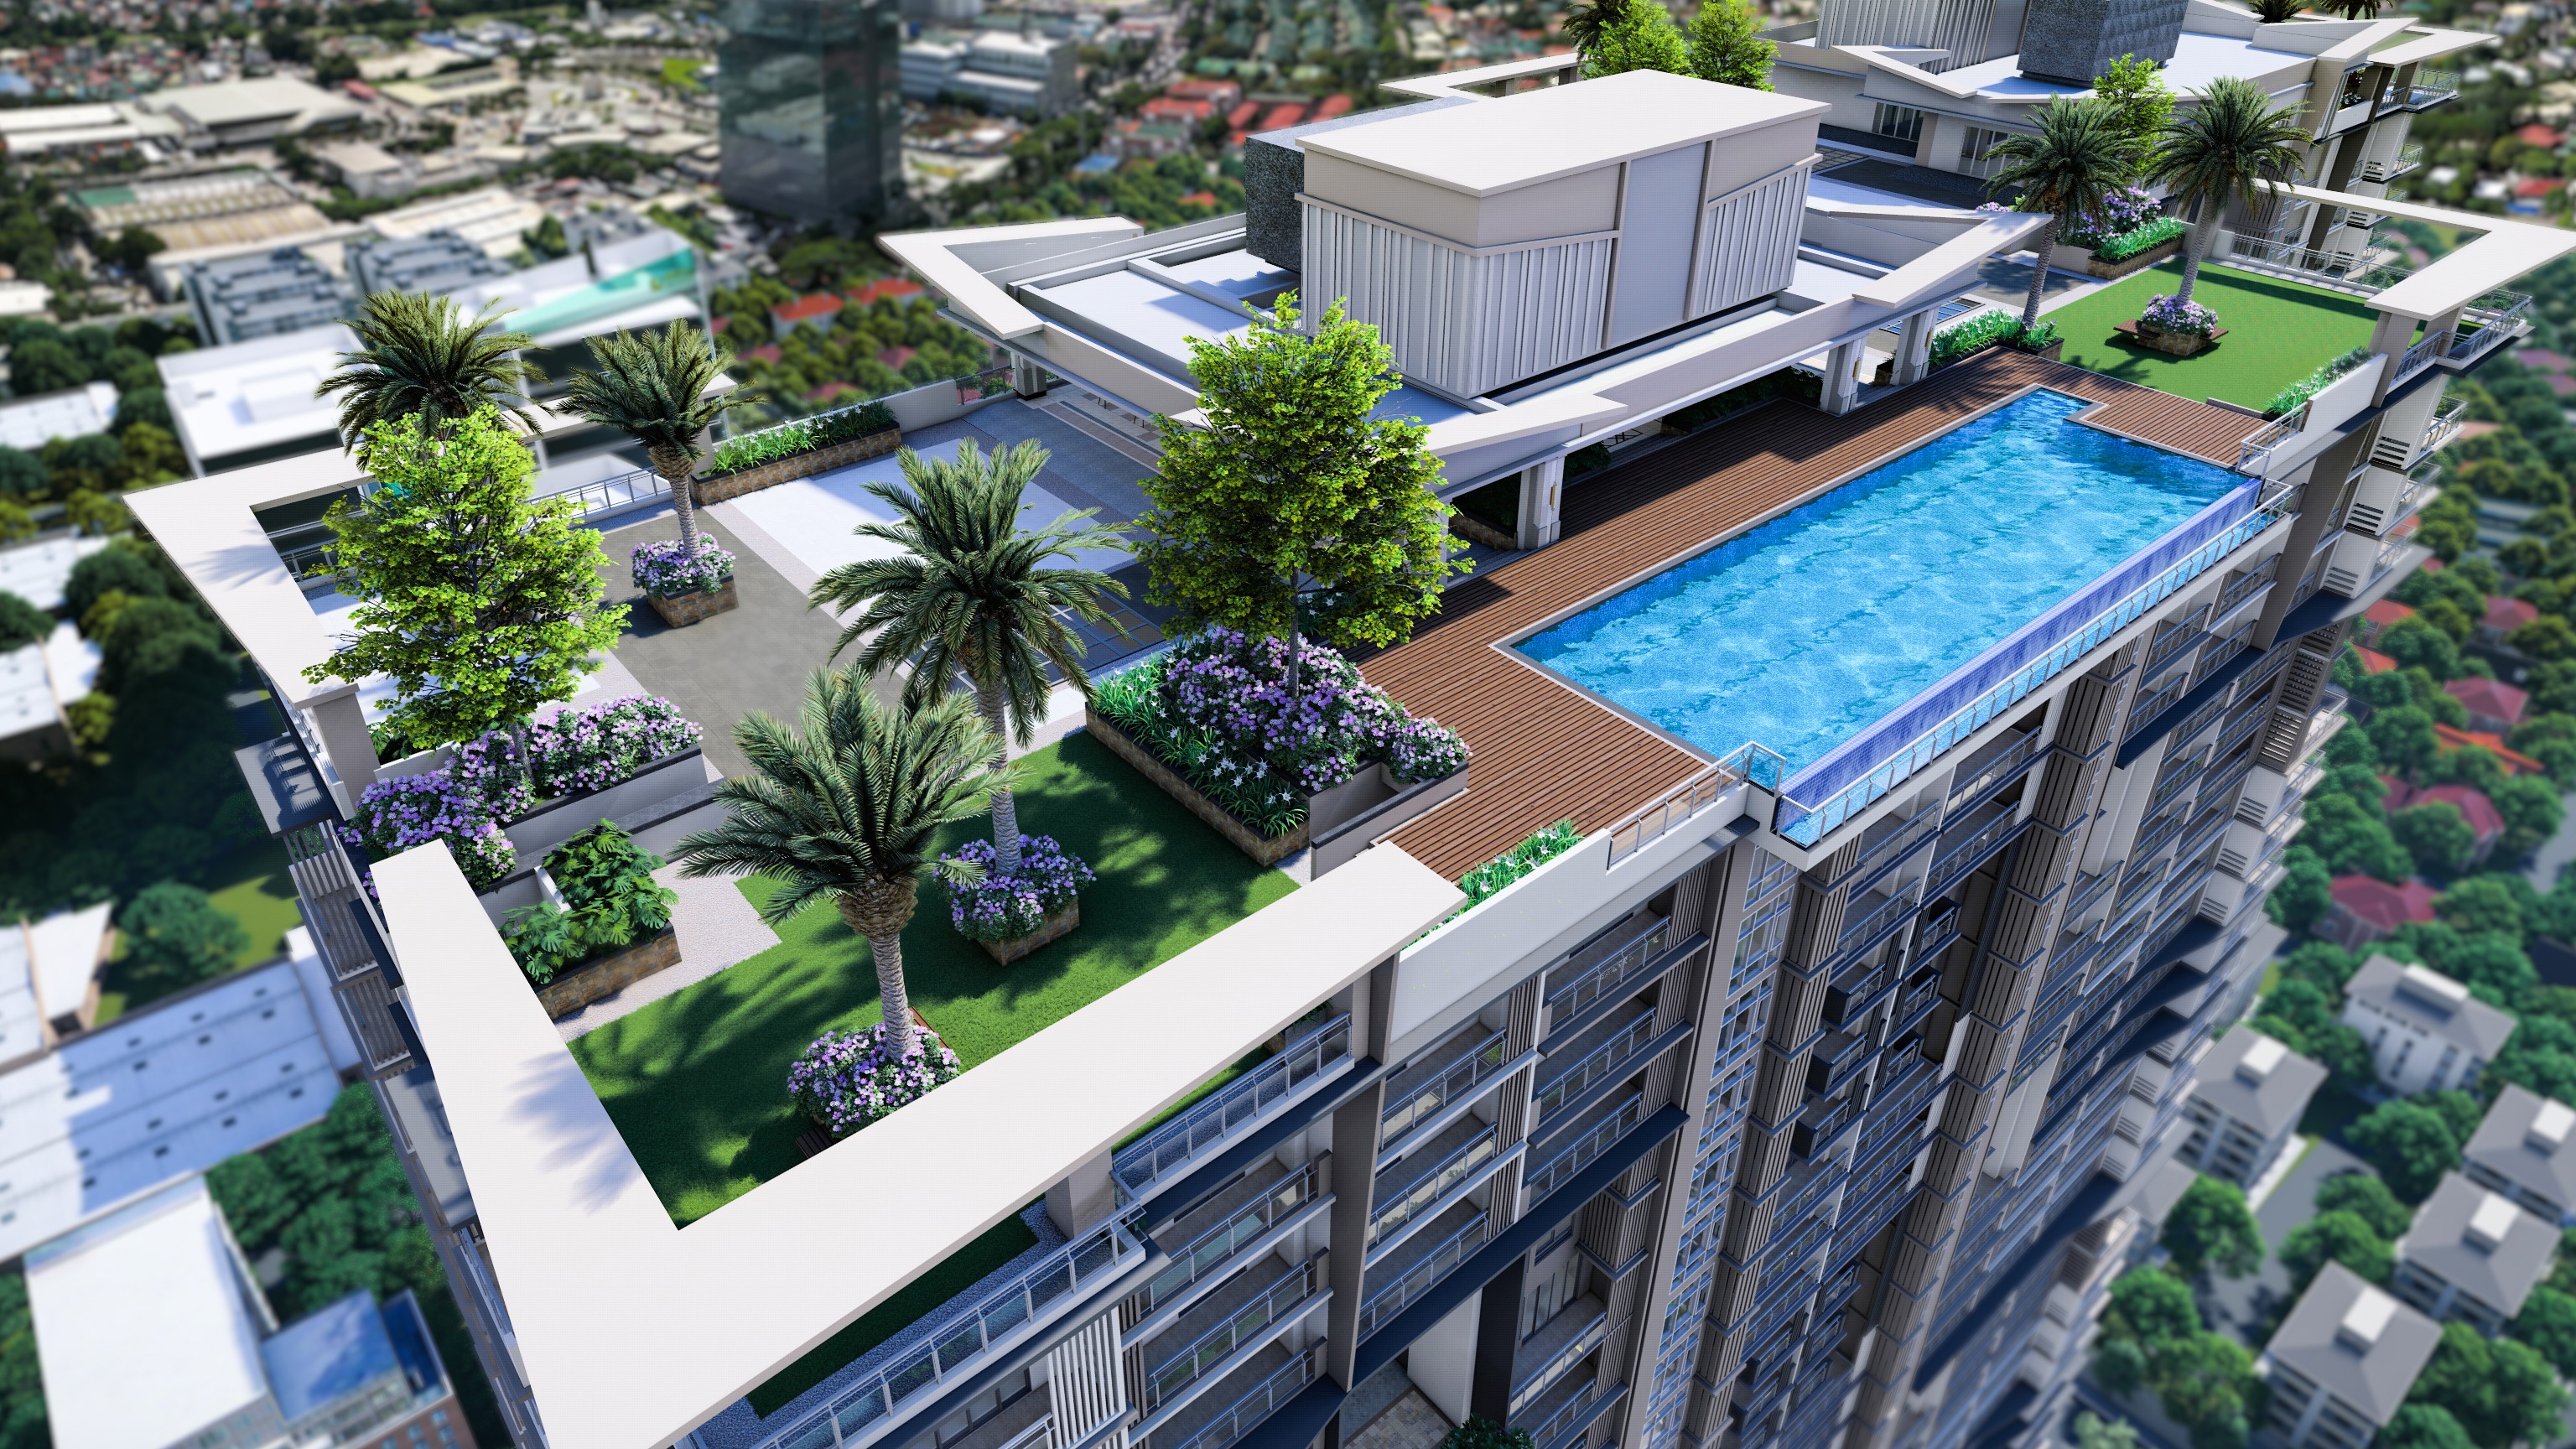 dmci-homes-japans-marubeni-corp-to-develop-the-valeron-tower-condo-in-pasig-1702948475461